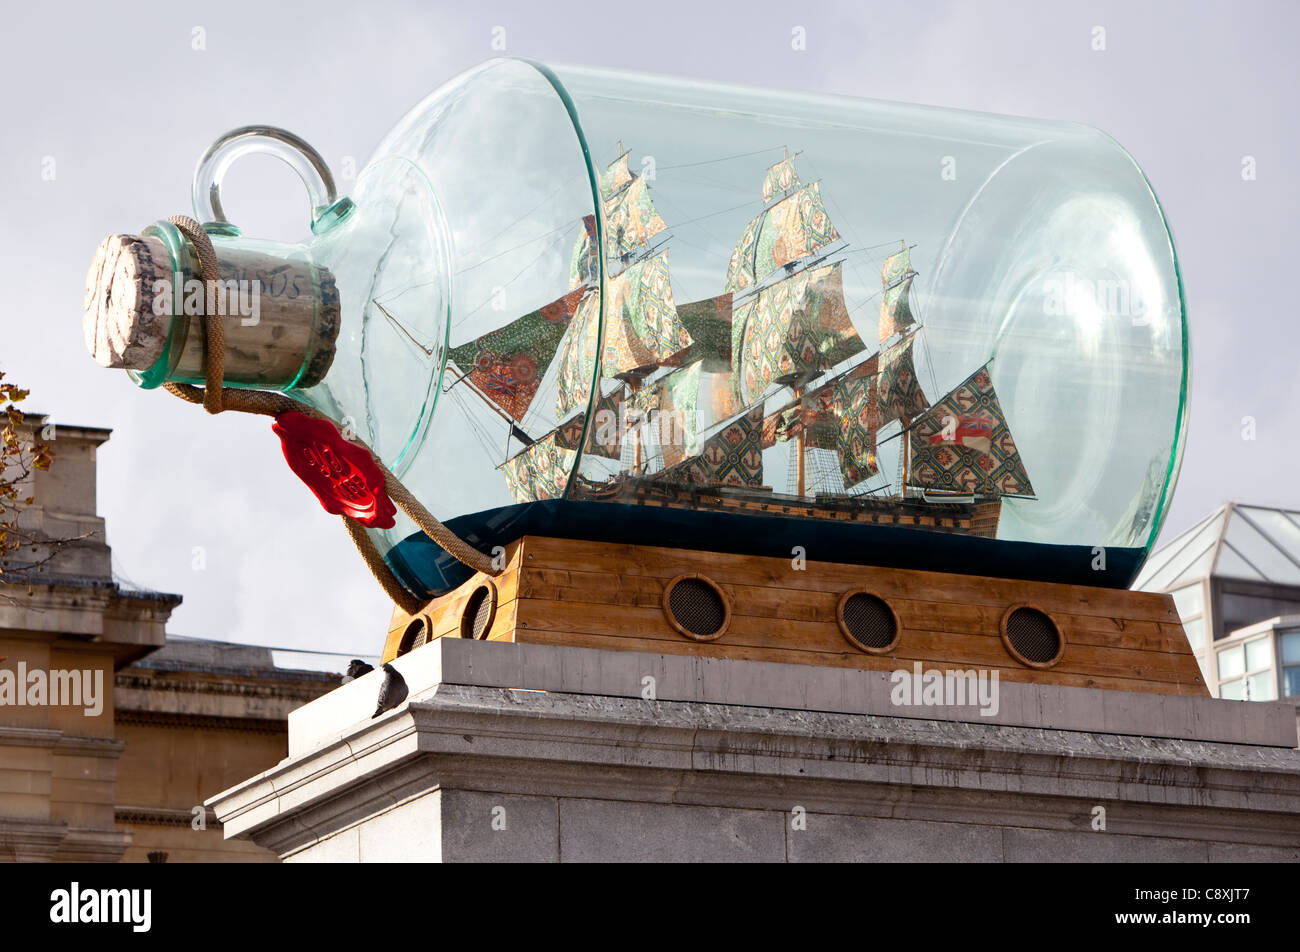 (Yinka Shonibare's) Nelson's ship in a bottle on the fourth plinth in Trafalgar Square, London, England, UK, GB. Stock Photo